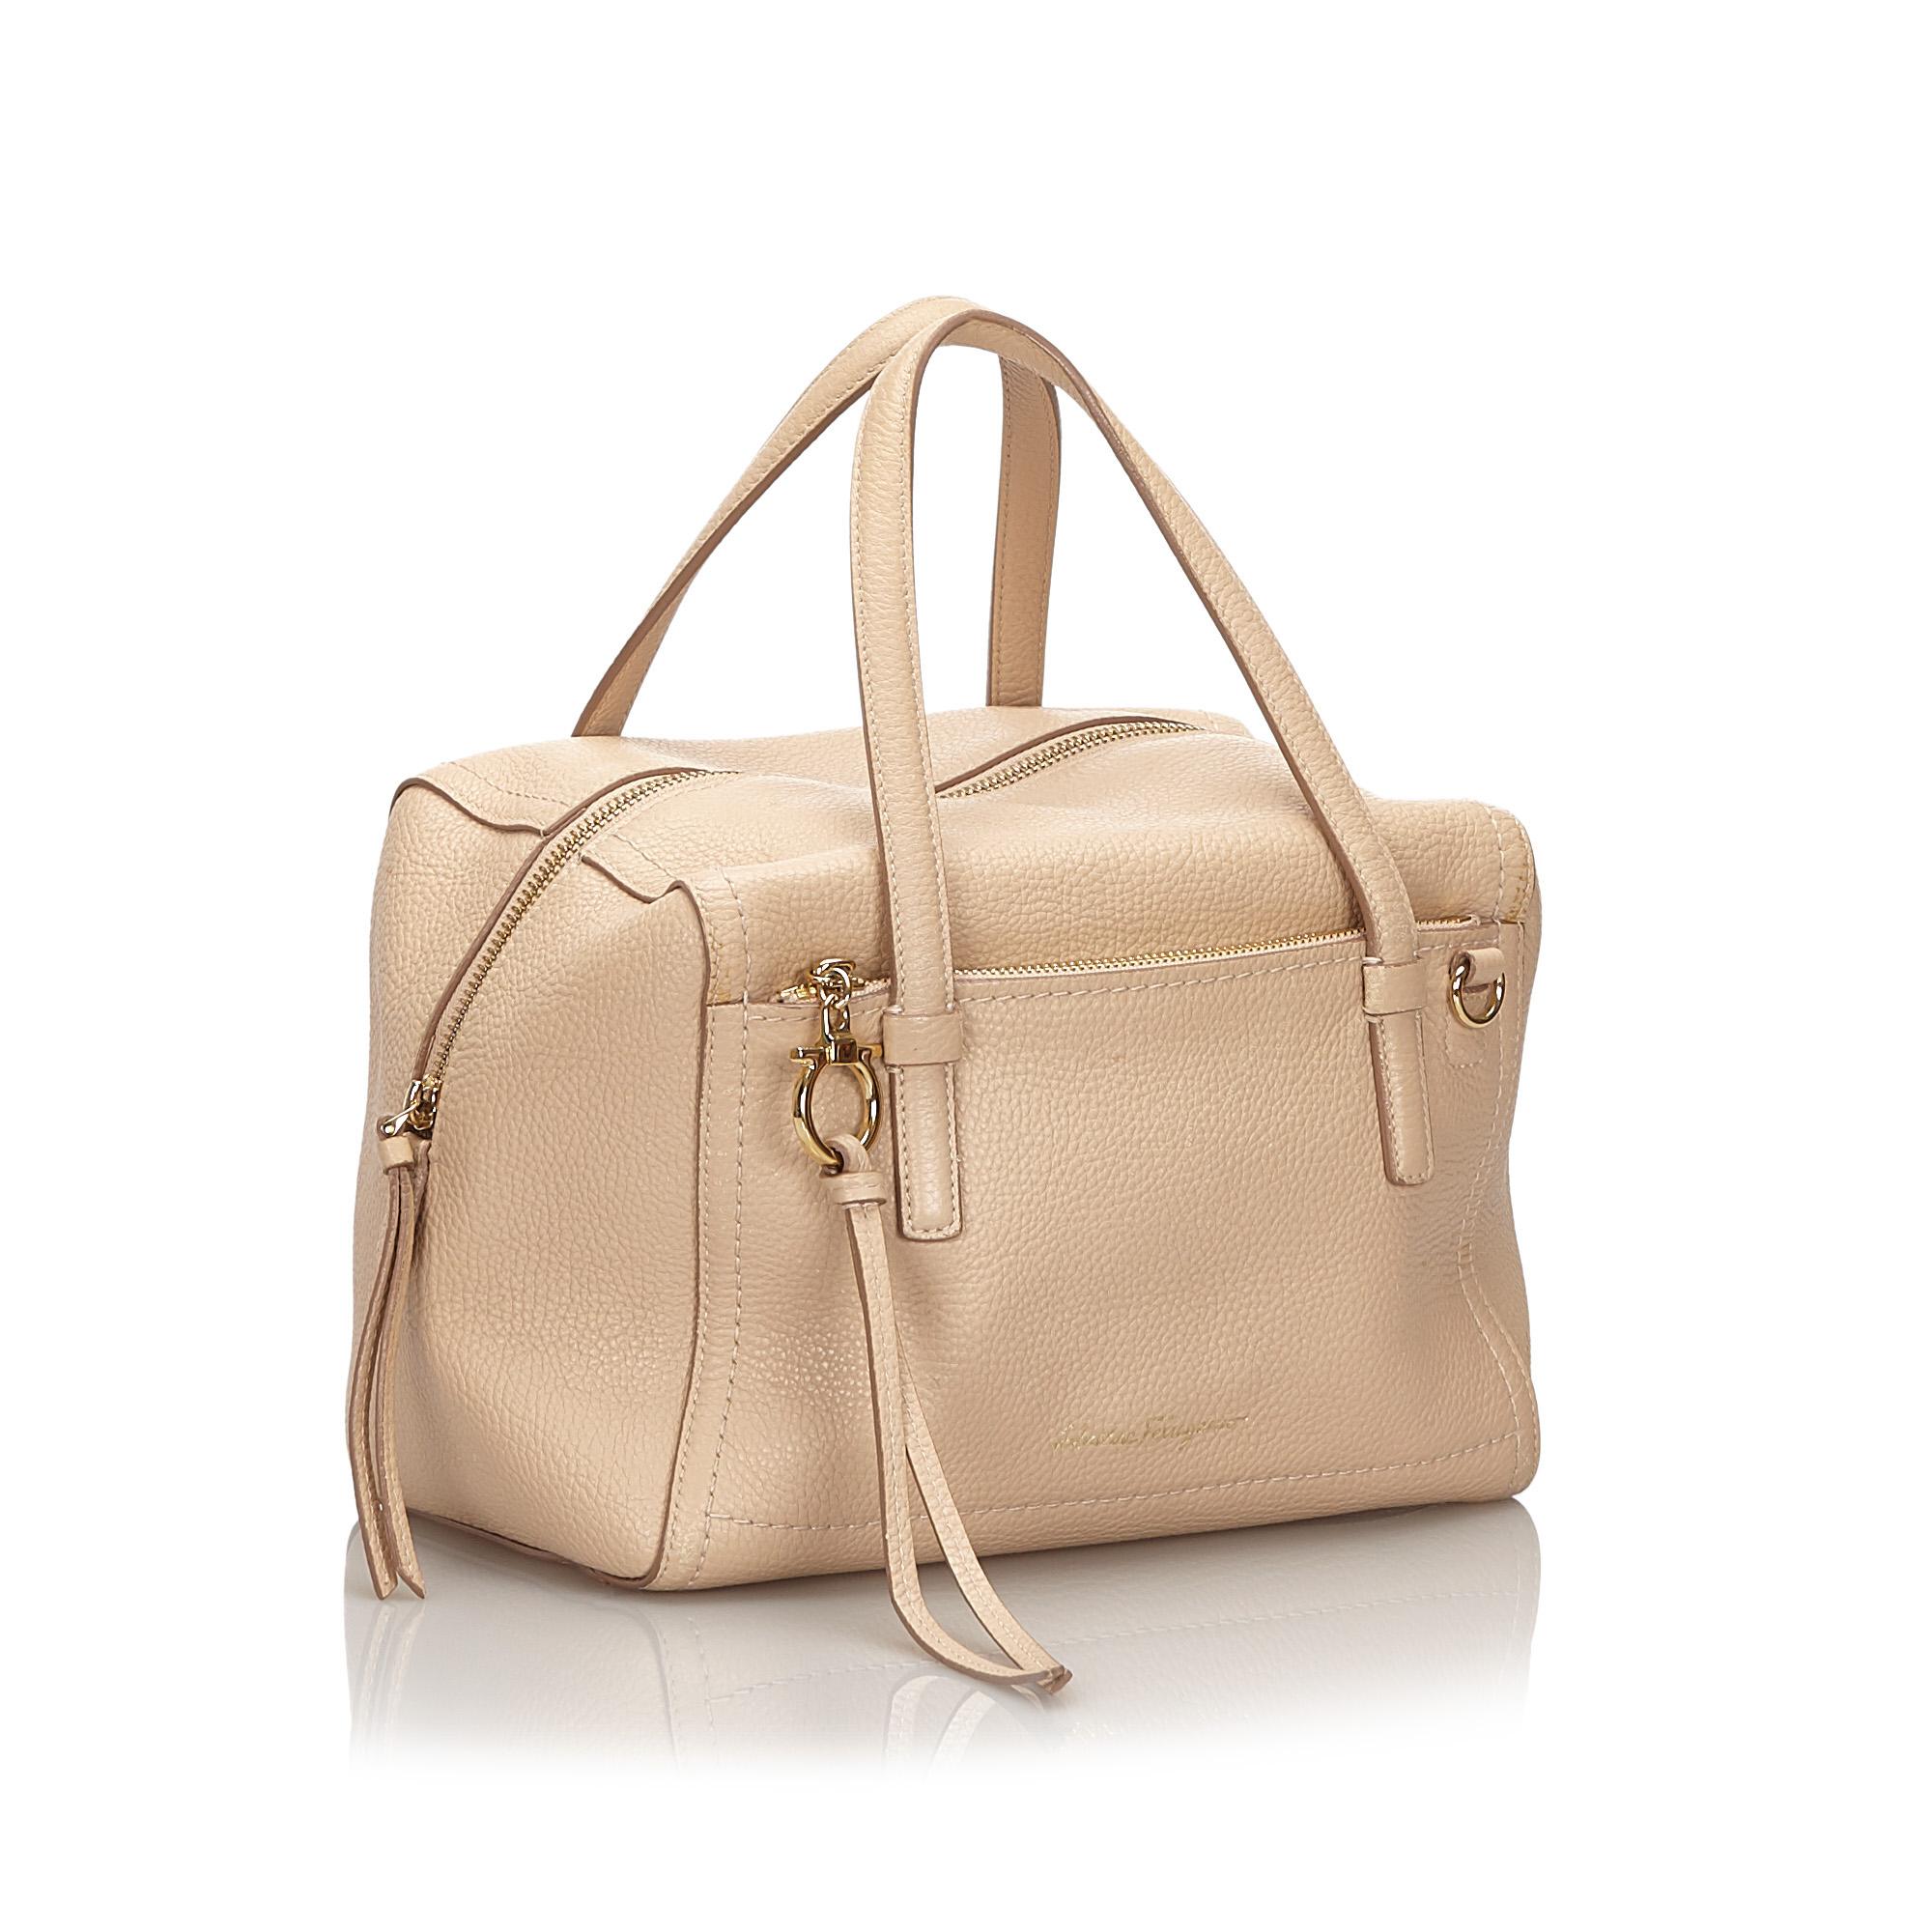 This satchel features a leather body, a front exterior zip pocket, flat leather handles, a detachable flat leather strap, a top zip closure, and interior pockets. It carries as B+ condition rating.

Inclusions: 
This item does not come with